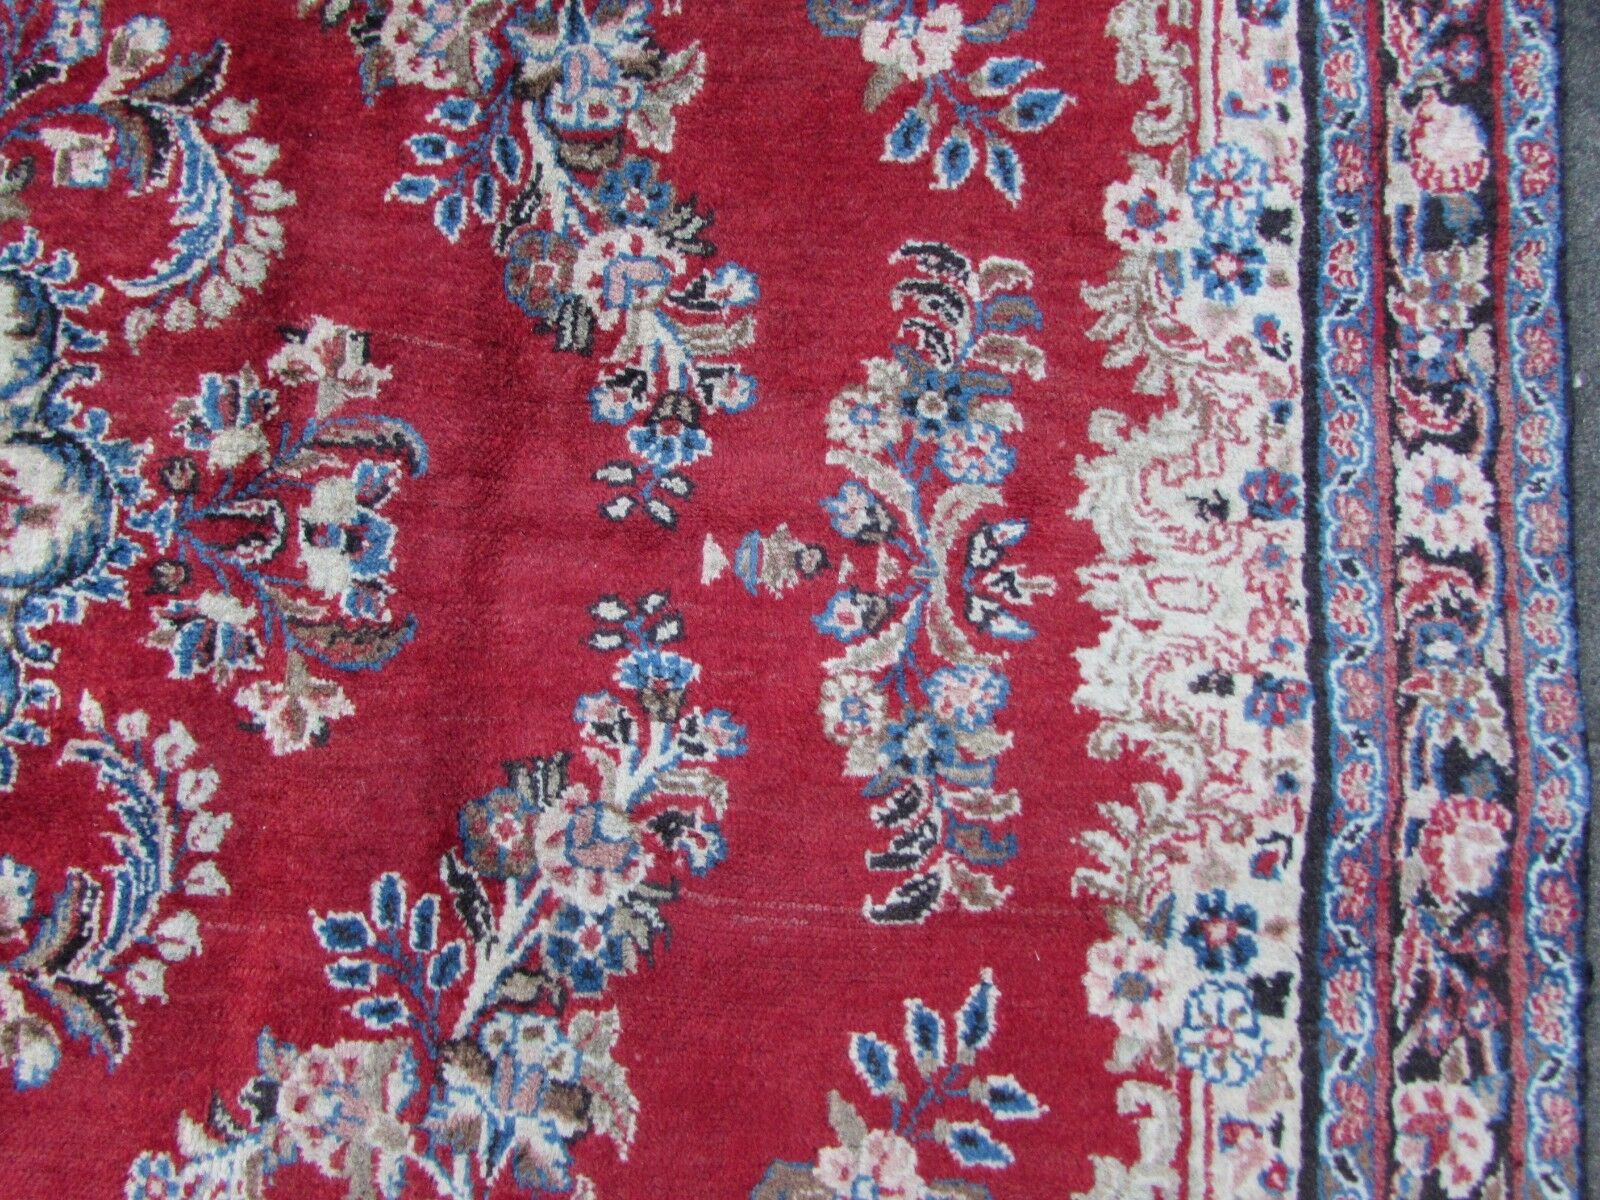 Handmade vintage Persian Kerman rug in bright red and sky blue color. The rug is from the end of 20th century in original condition, it has some low pile.